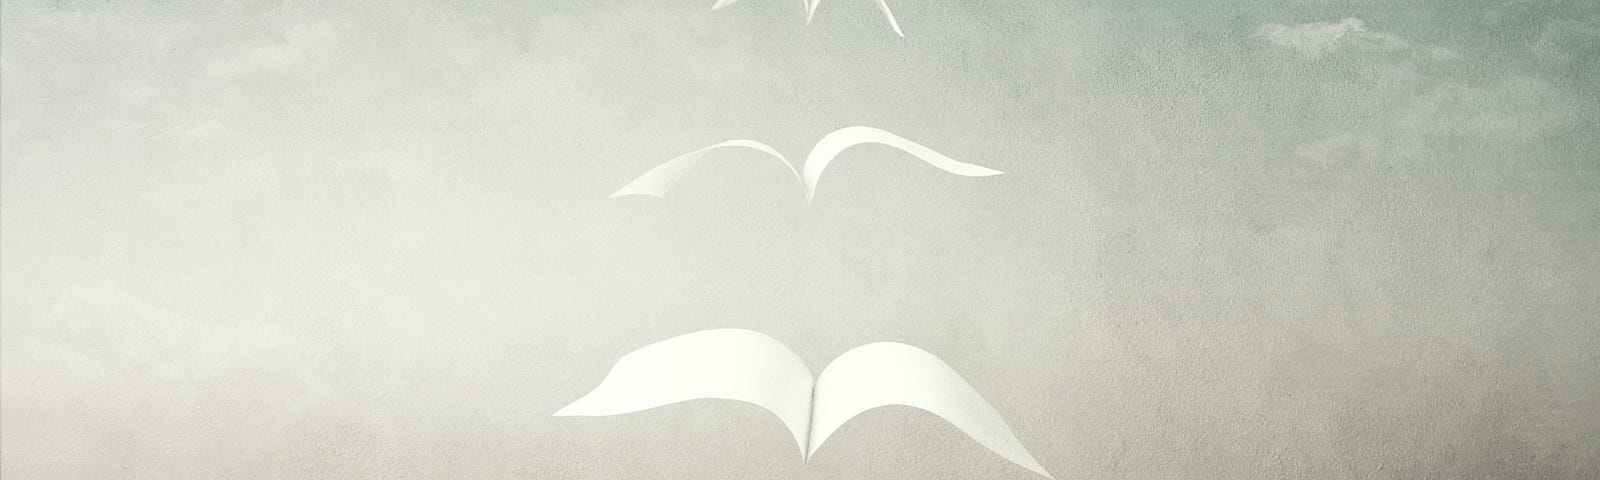 Pages from an open book transforming into birds and flying away.